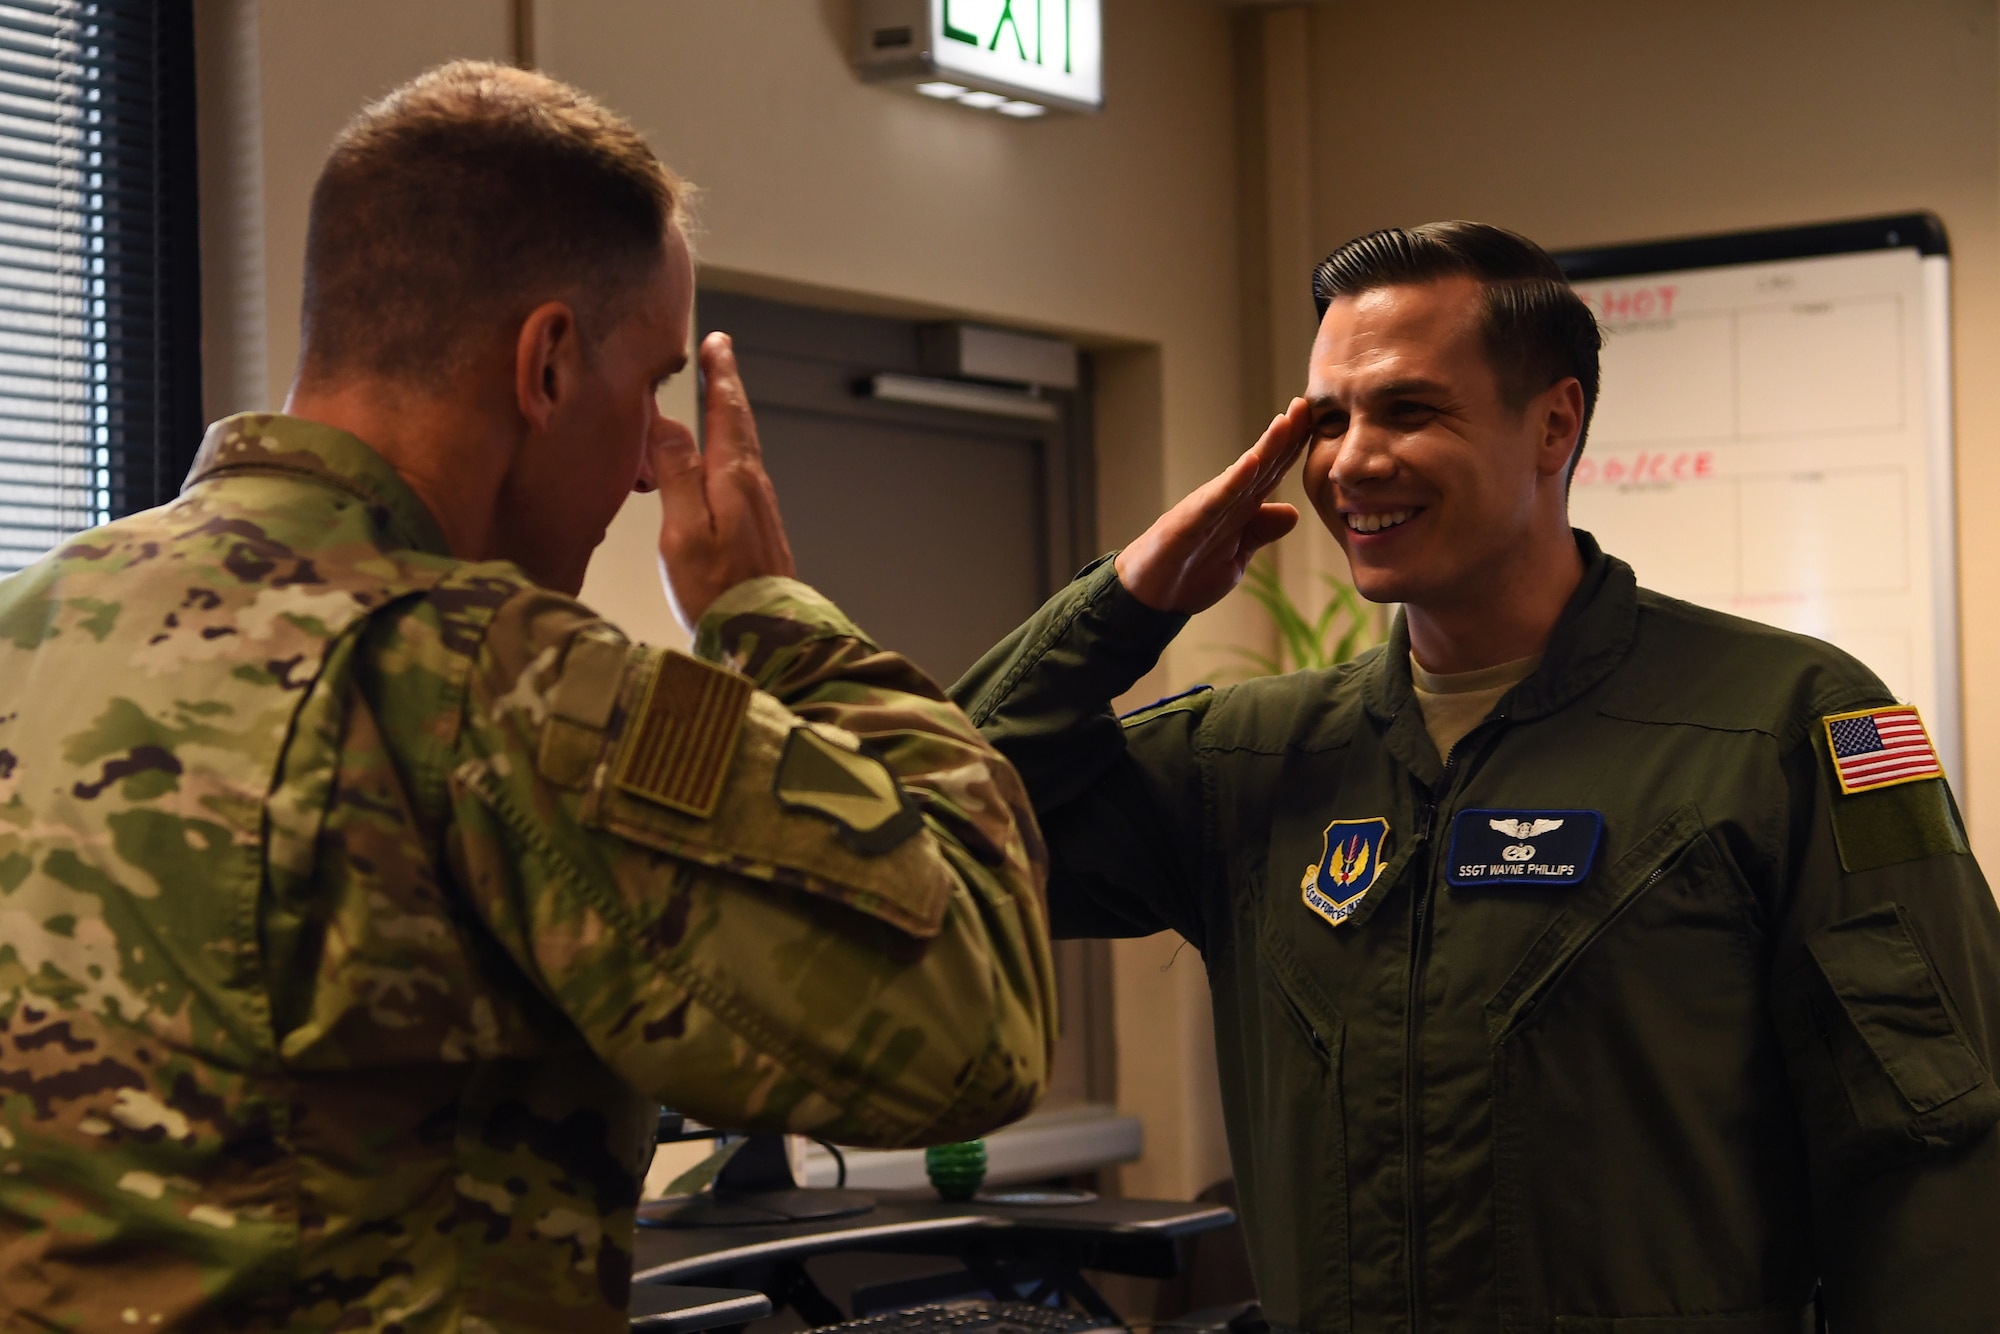 U.S. Air Force Staff Sgt. Wayne Phillips, 76th Airlift Squadron flight attendant, salutes U.S. Air Force Col. Matthew Husemann, 86th Airlift Wing vice commander, at the 76th Airlift Squadron headquarters building on Ramstein Air Base, Germany, June 27, 2019. Phillips was recognized as the 86th Airlift Wing’s Airlifter of the Week. (U.S. Air Force photo by Staff Sgt. Nesha Stanton)